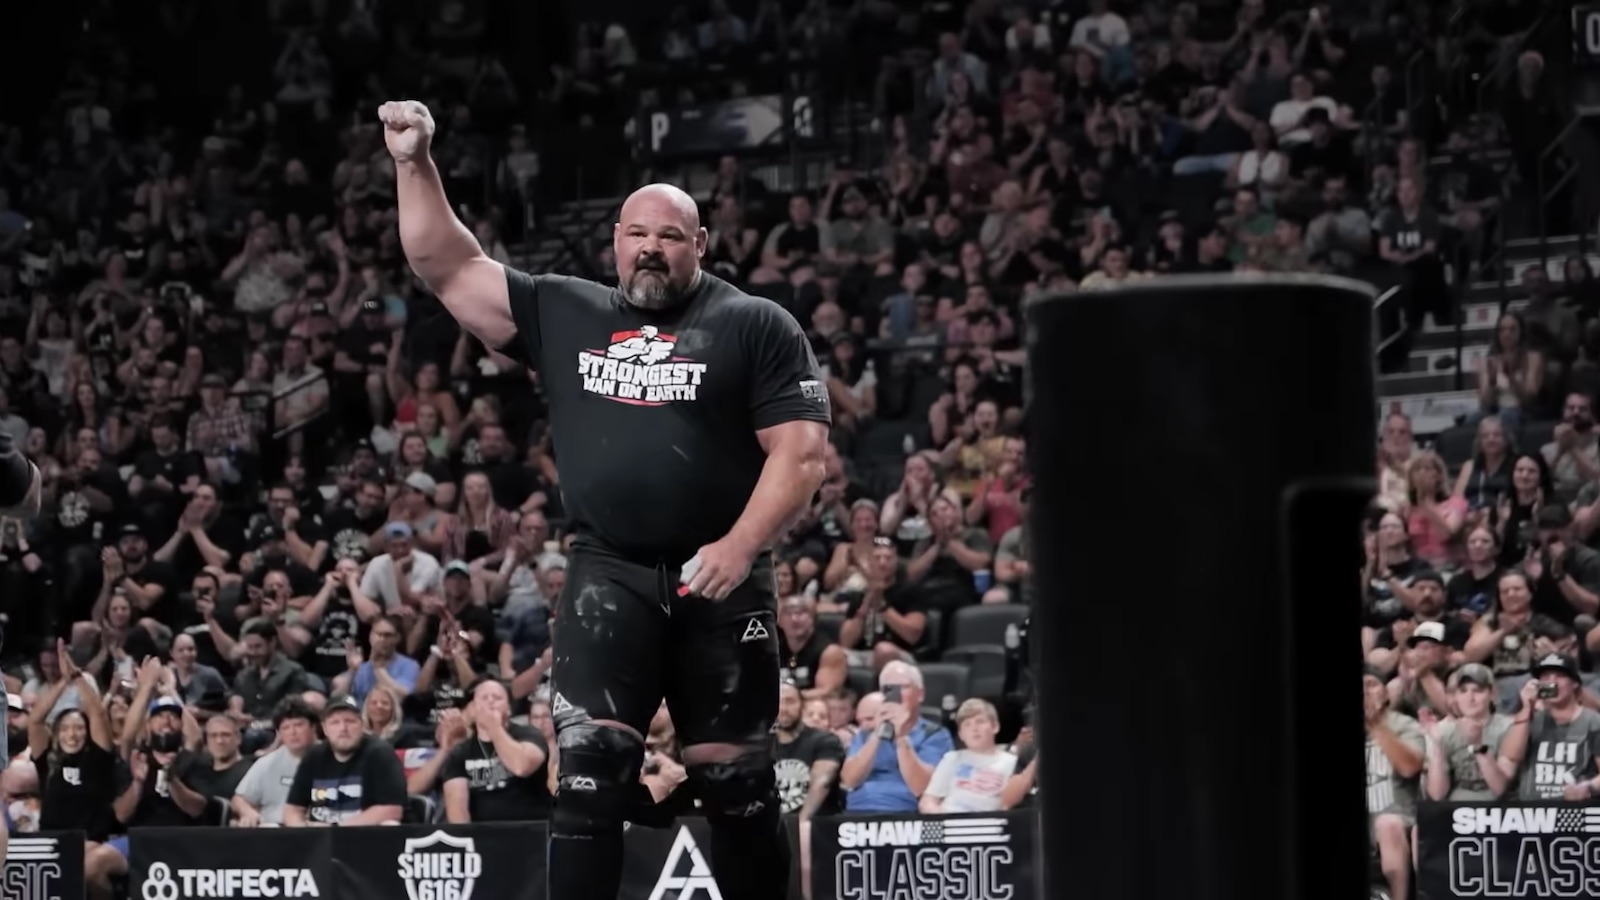 Brian Shaw Wins 2023 Shaw Classic, The Strongest Man on Earth